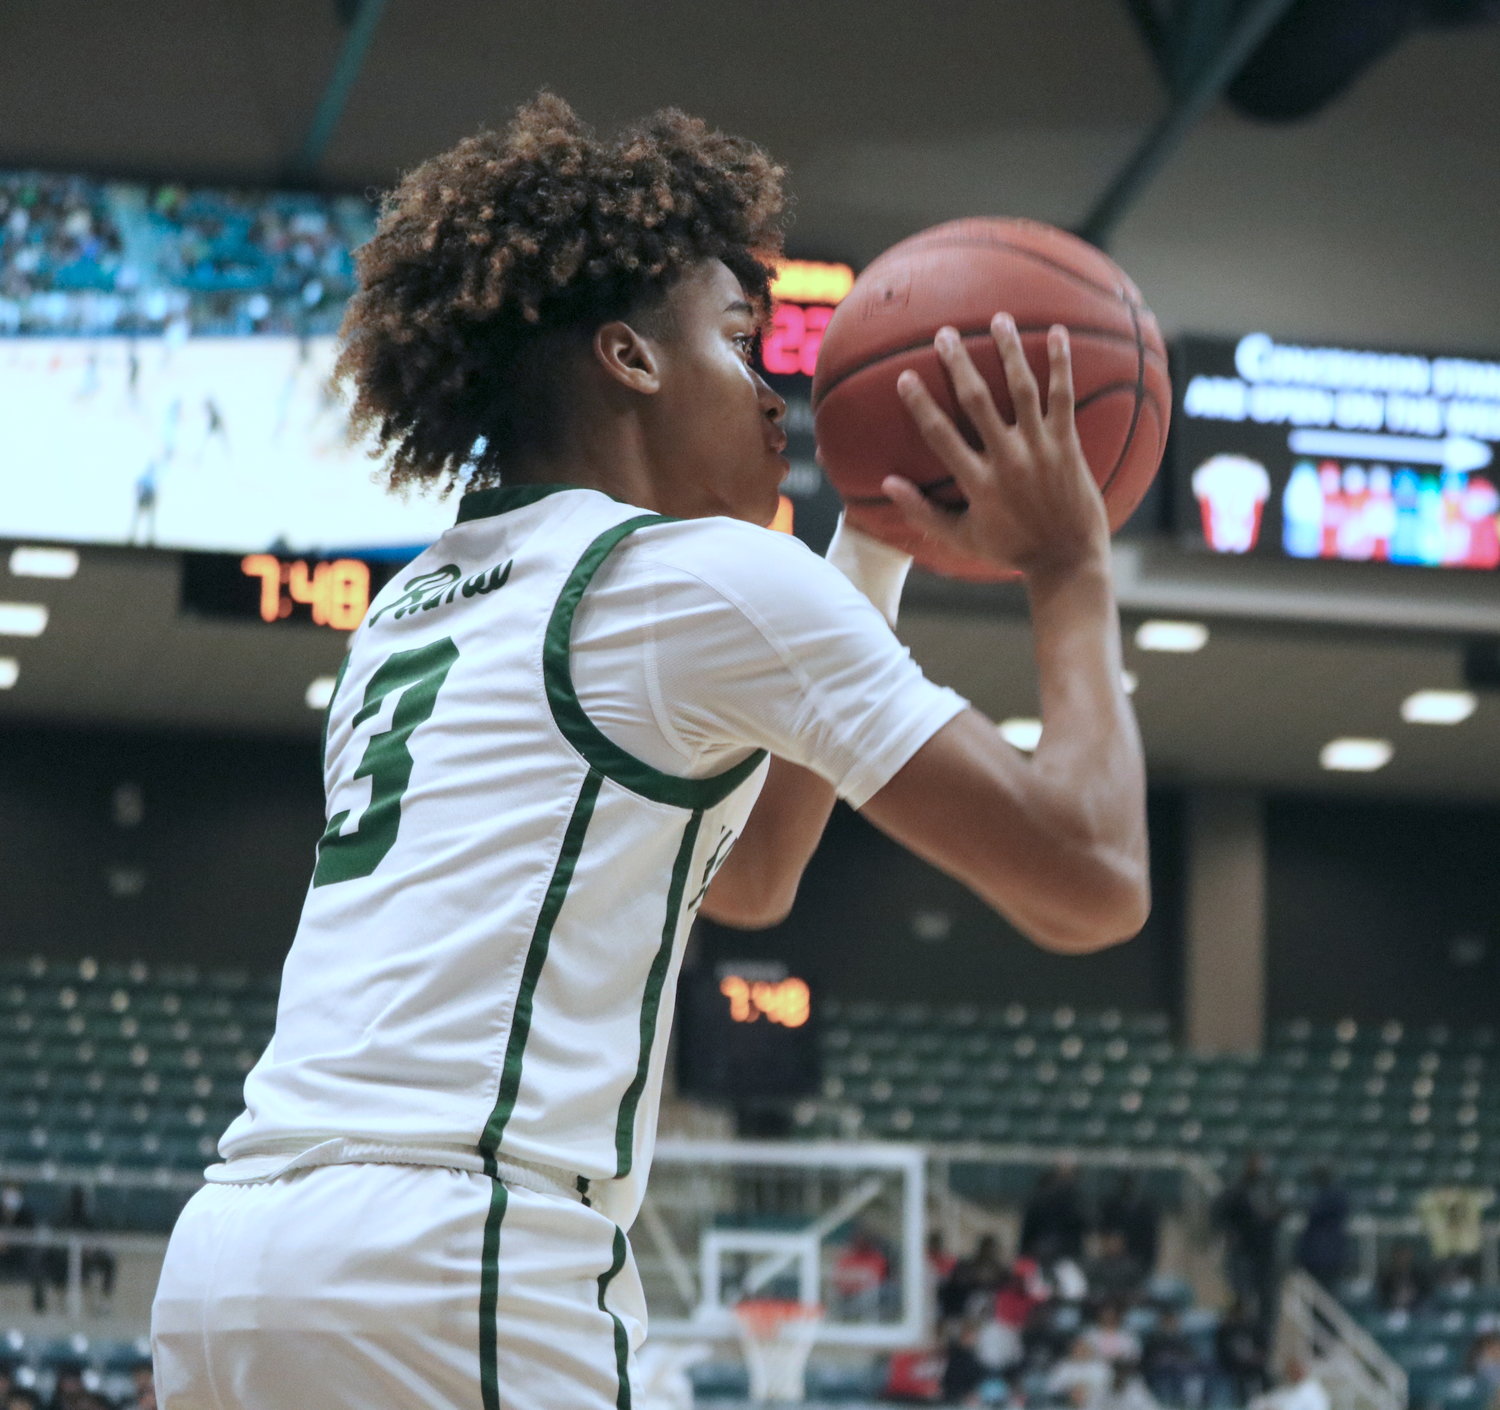 Christian Jones takes a 3-pointer during Tuesday’s Class 6A regional quarterfinal between Mayde Creek and Fort Bend Clements at the Merrell Center.